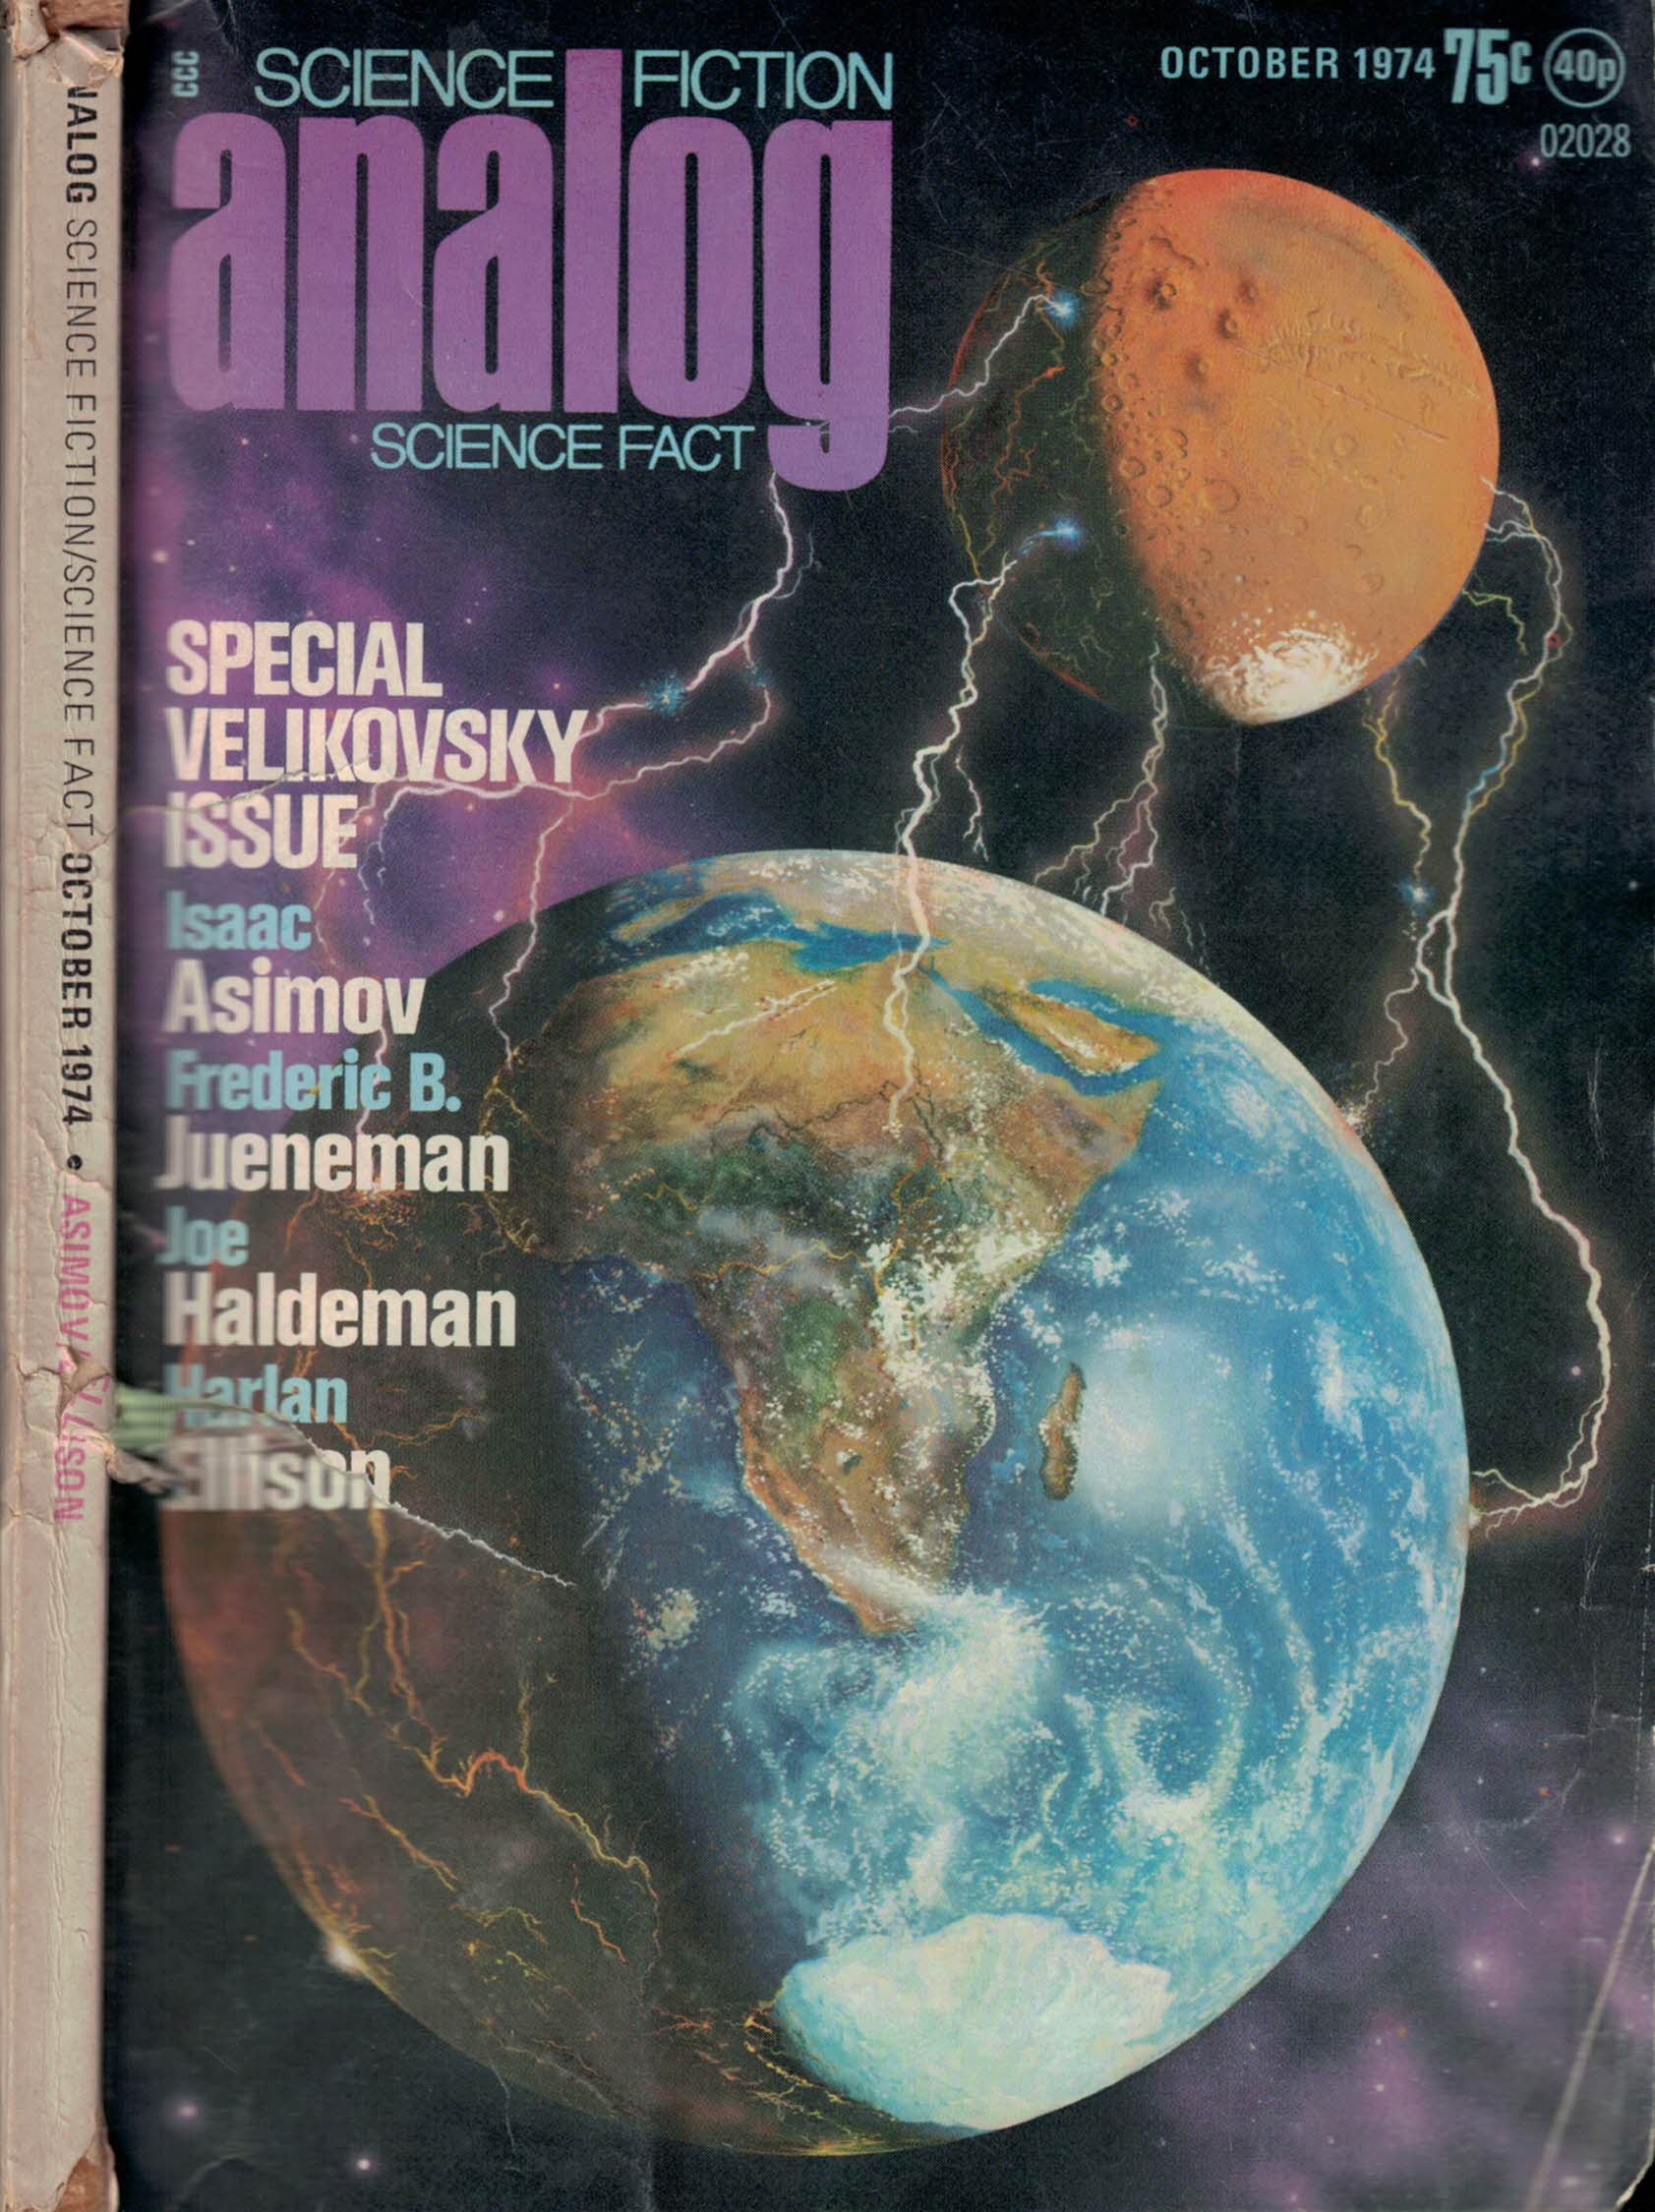 Analog. Science Fiction and Fact. Volume 94, Number 2. October 1974.